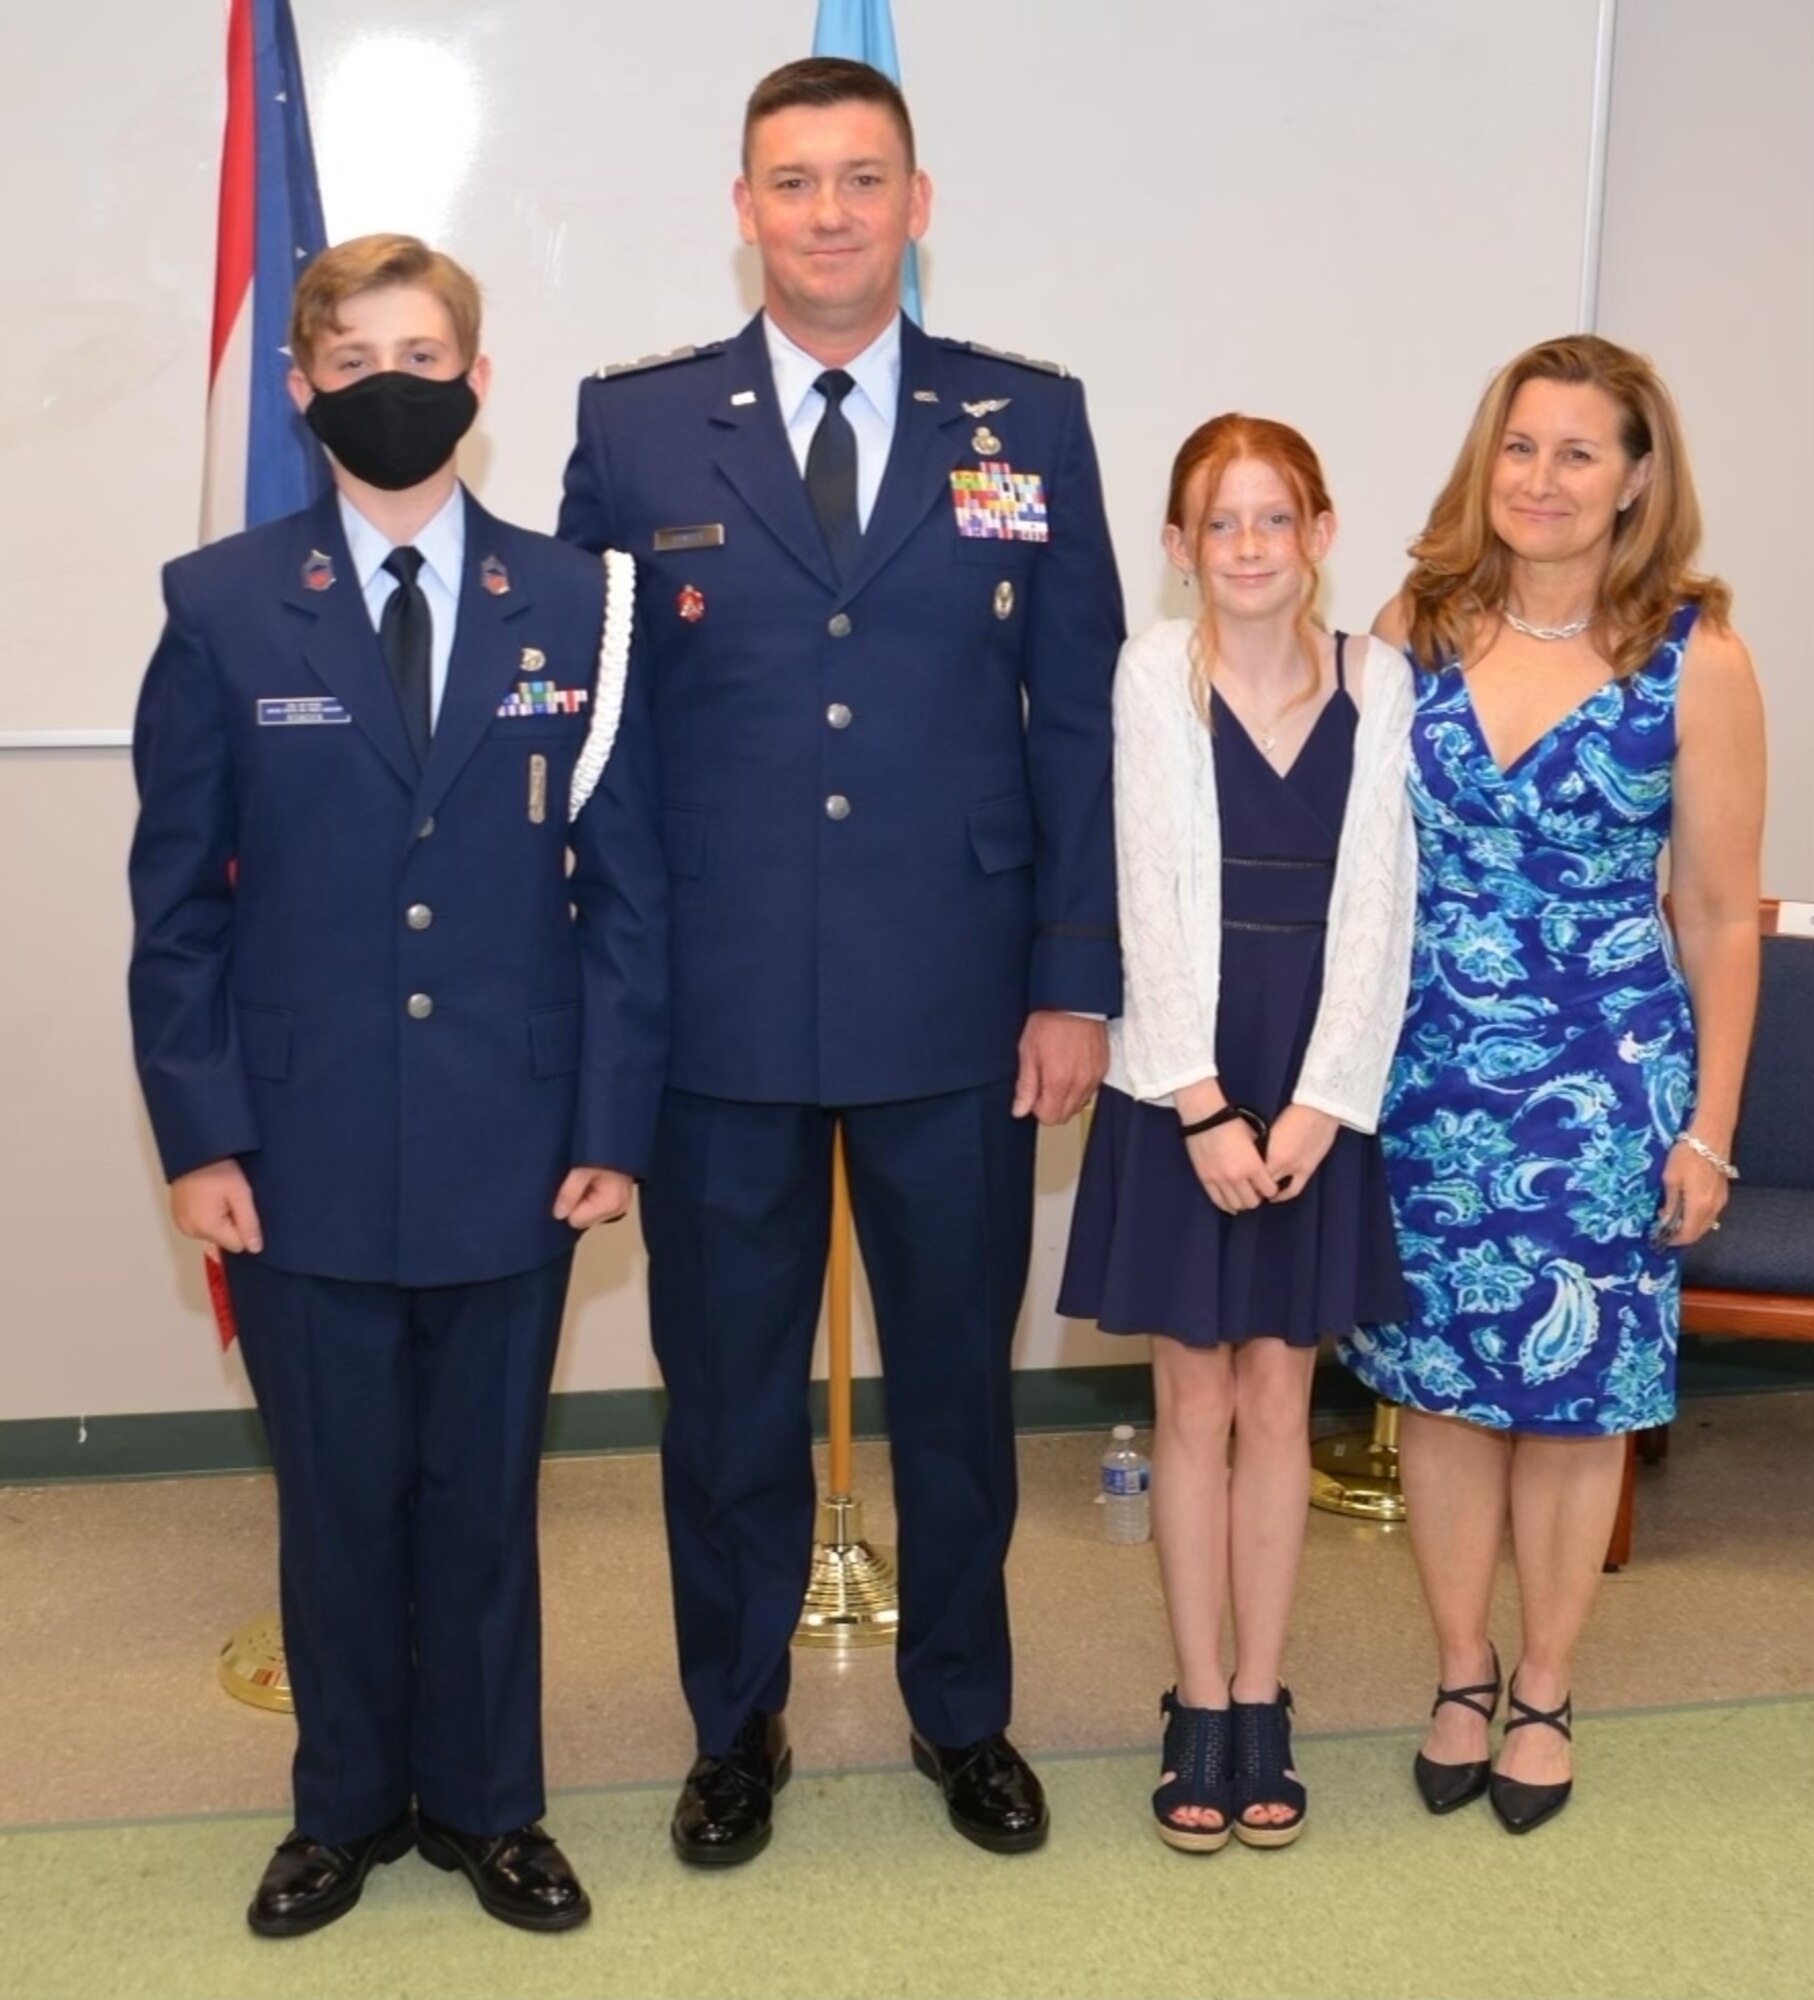 Chief Master Sgt. Peter Bowden, 178th Wing Security Forces Manager, poses with his family. (Photo provided)